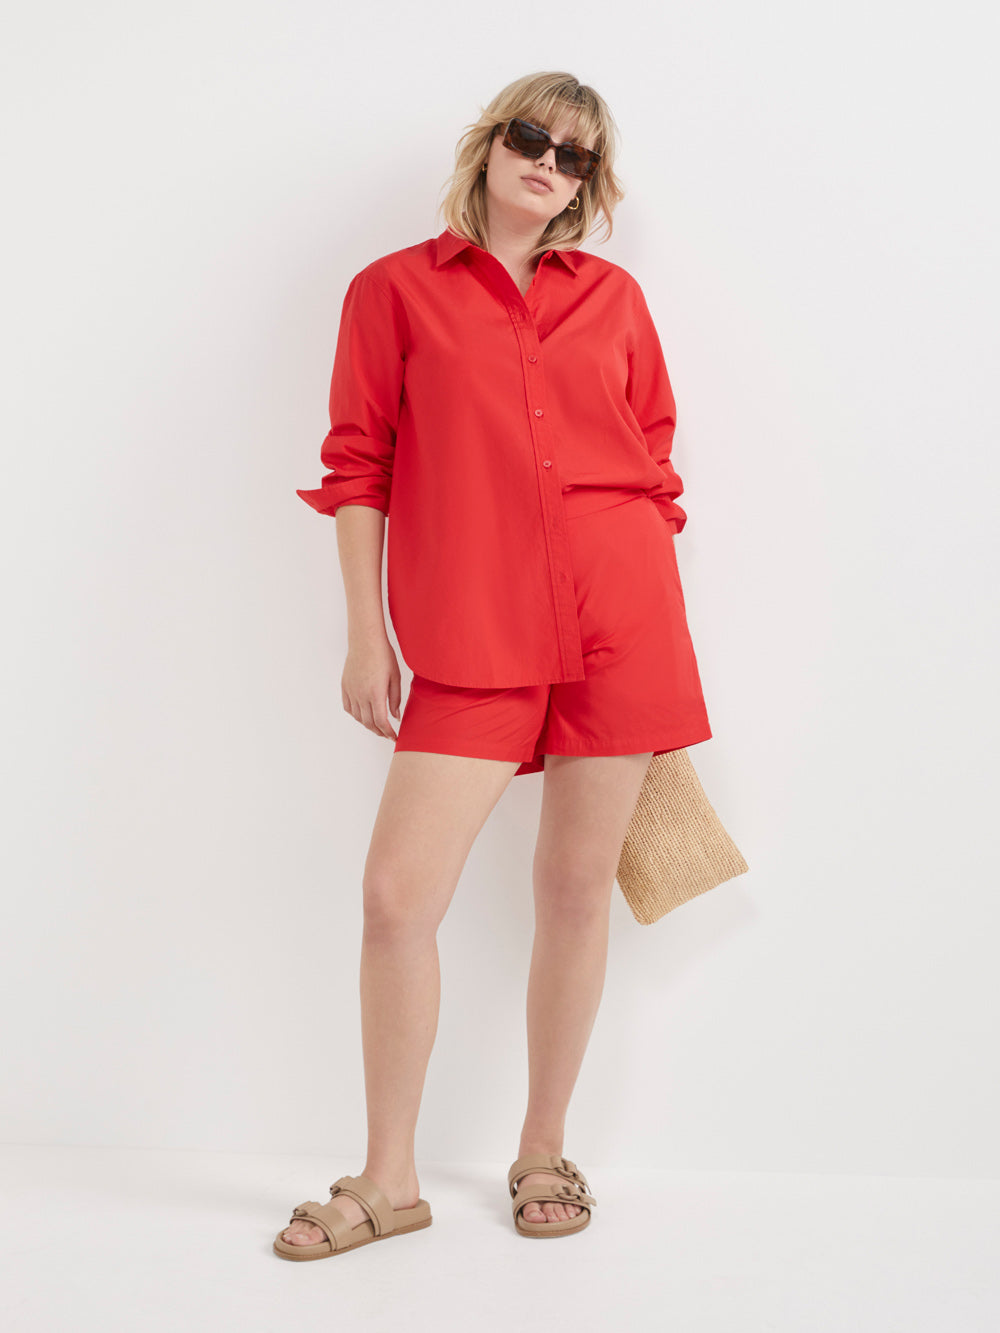 The Cotton Poplin Relaxed Short